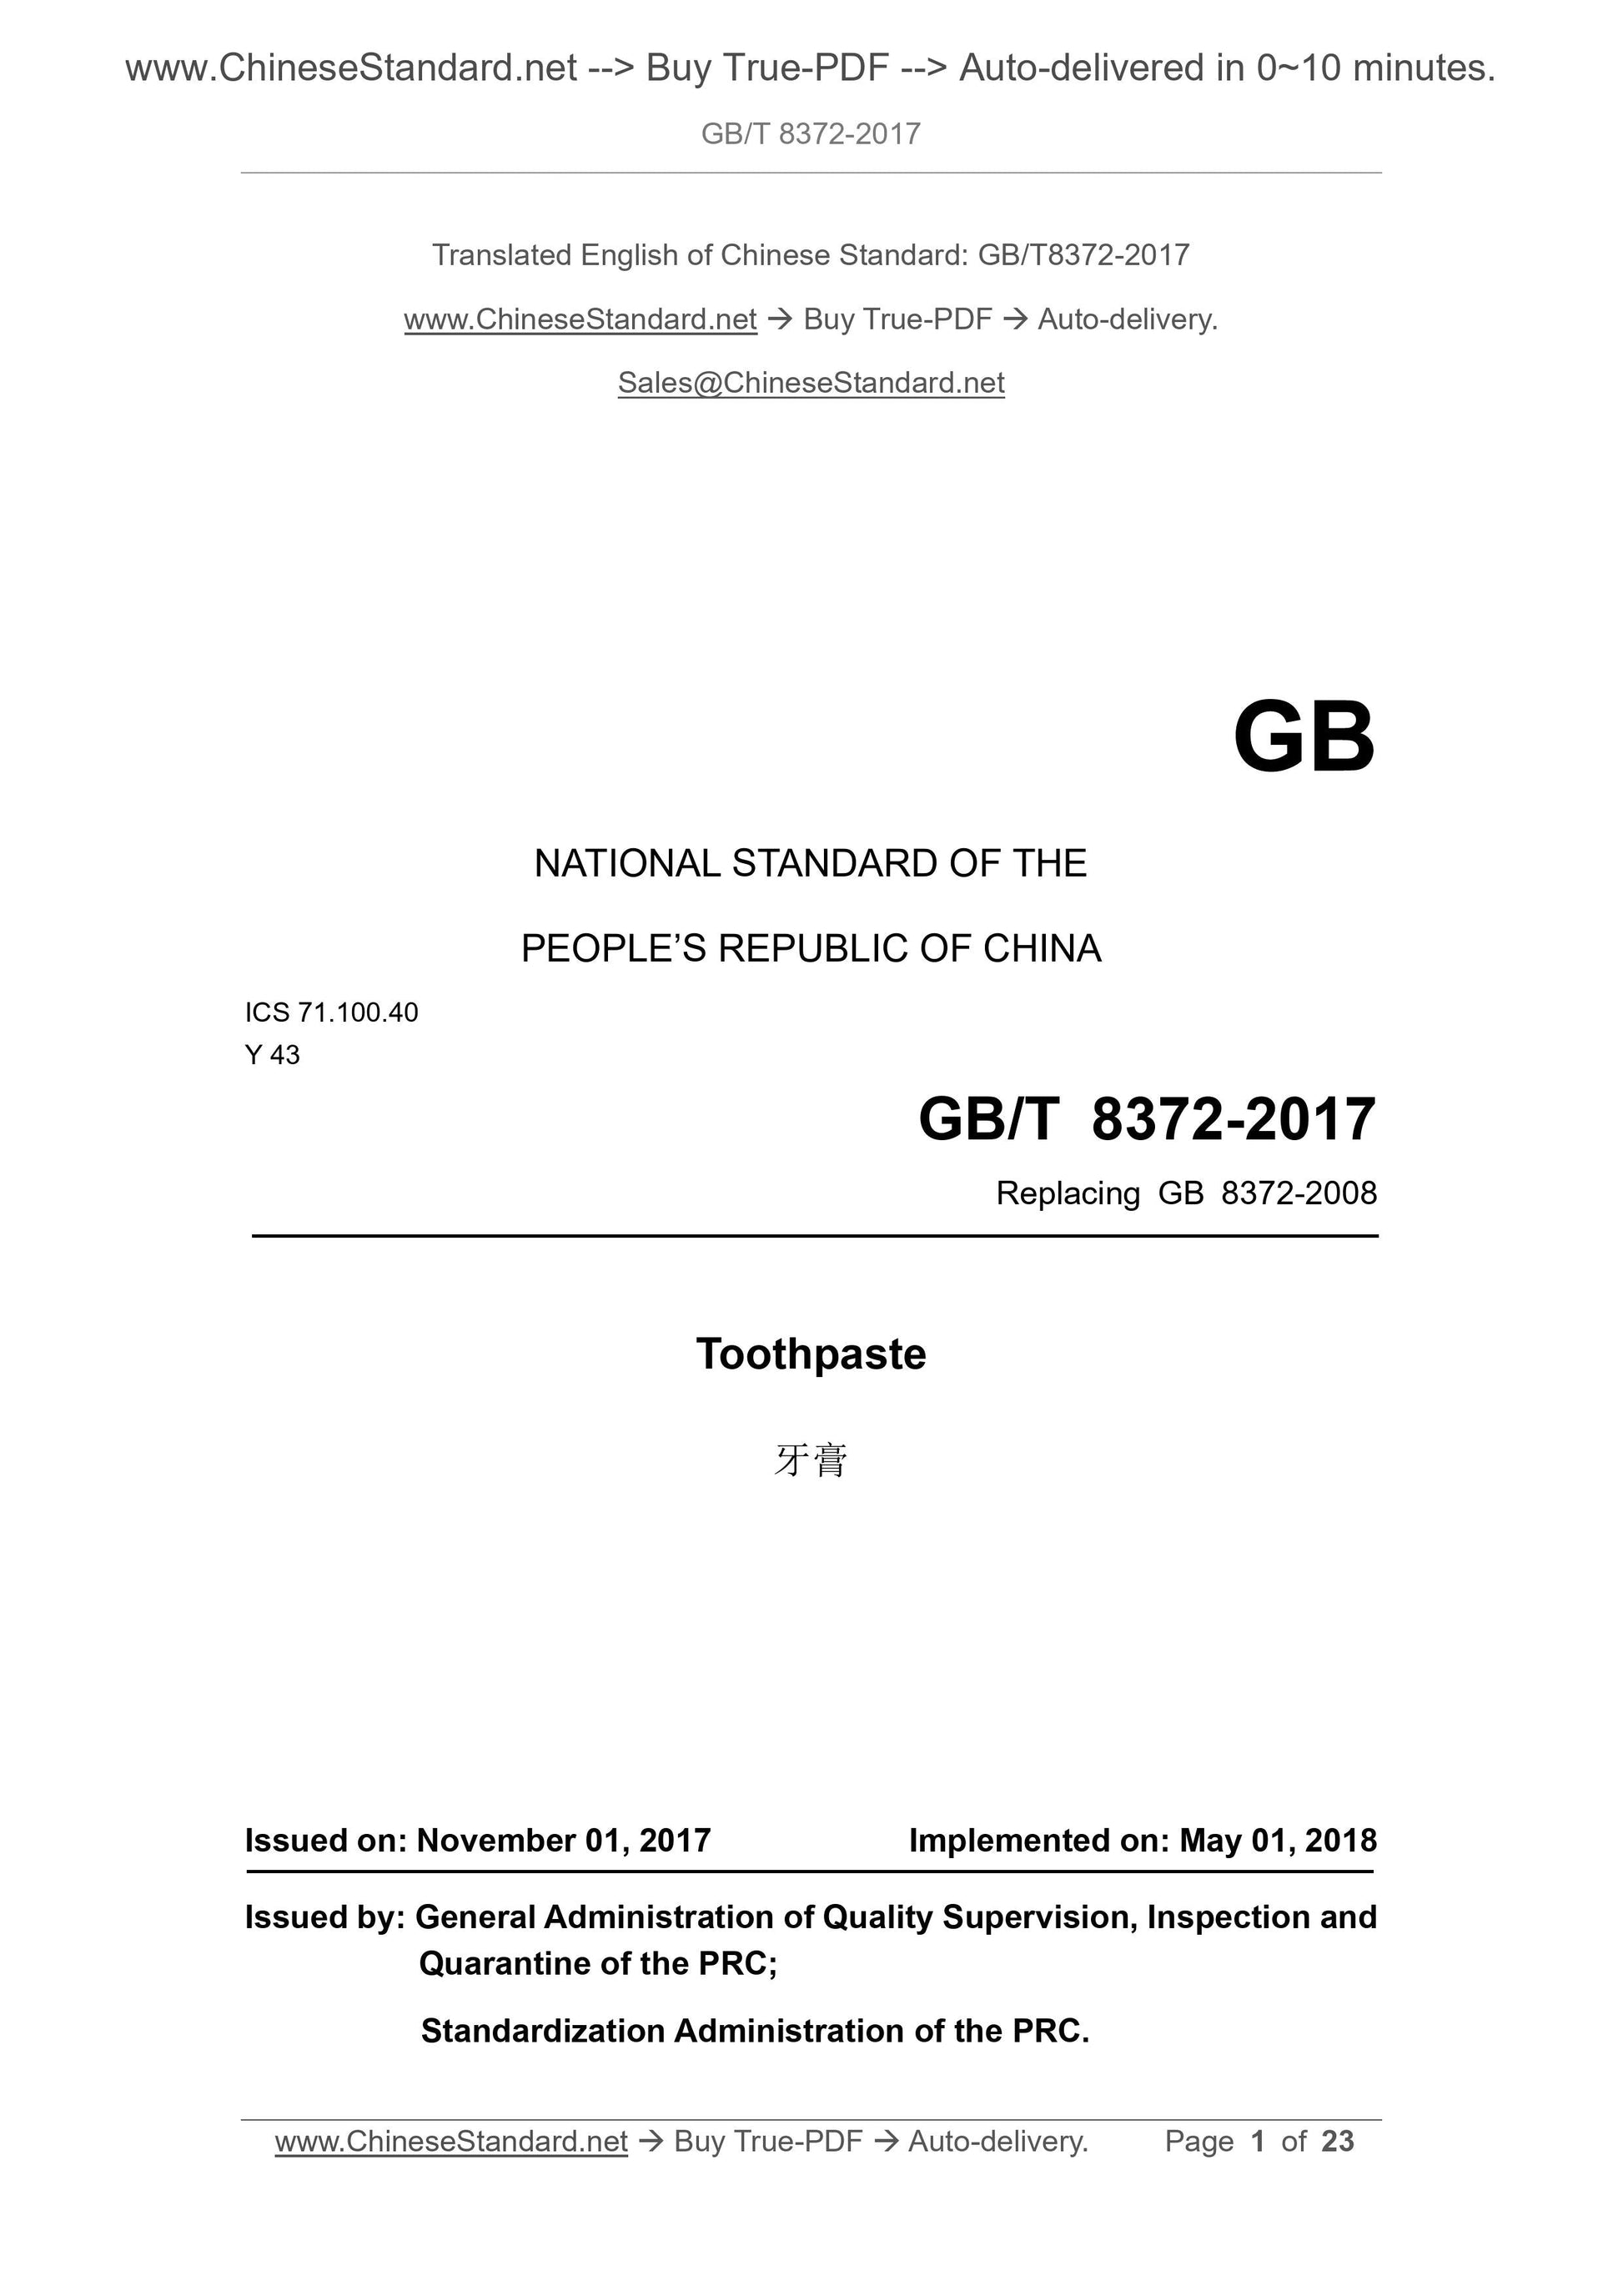 GB/T 8372-2017 Page 1